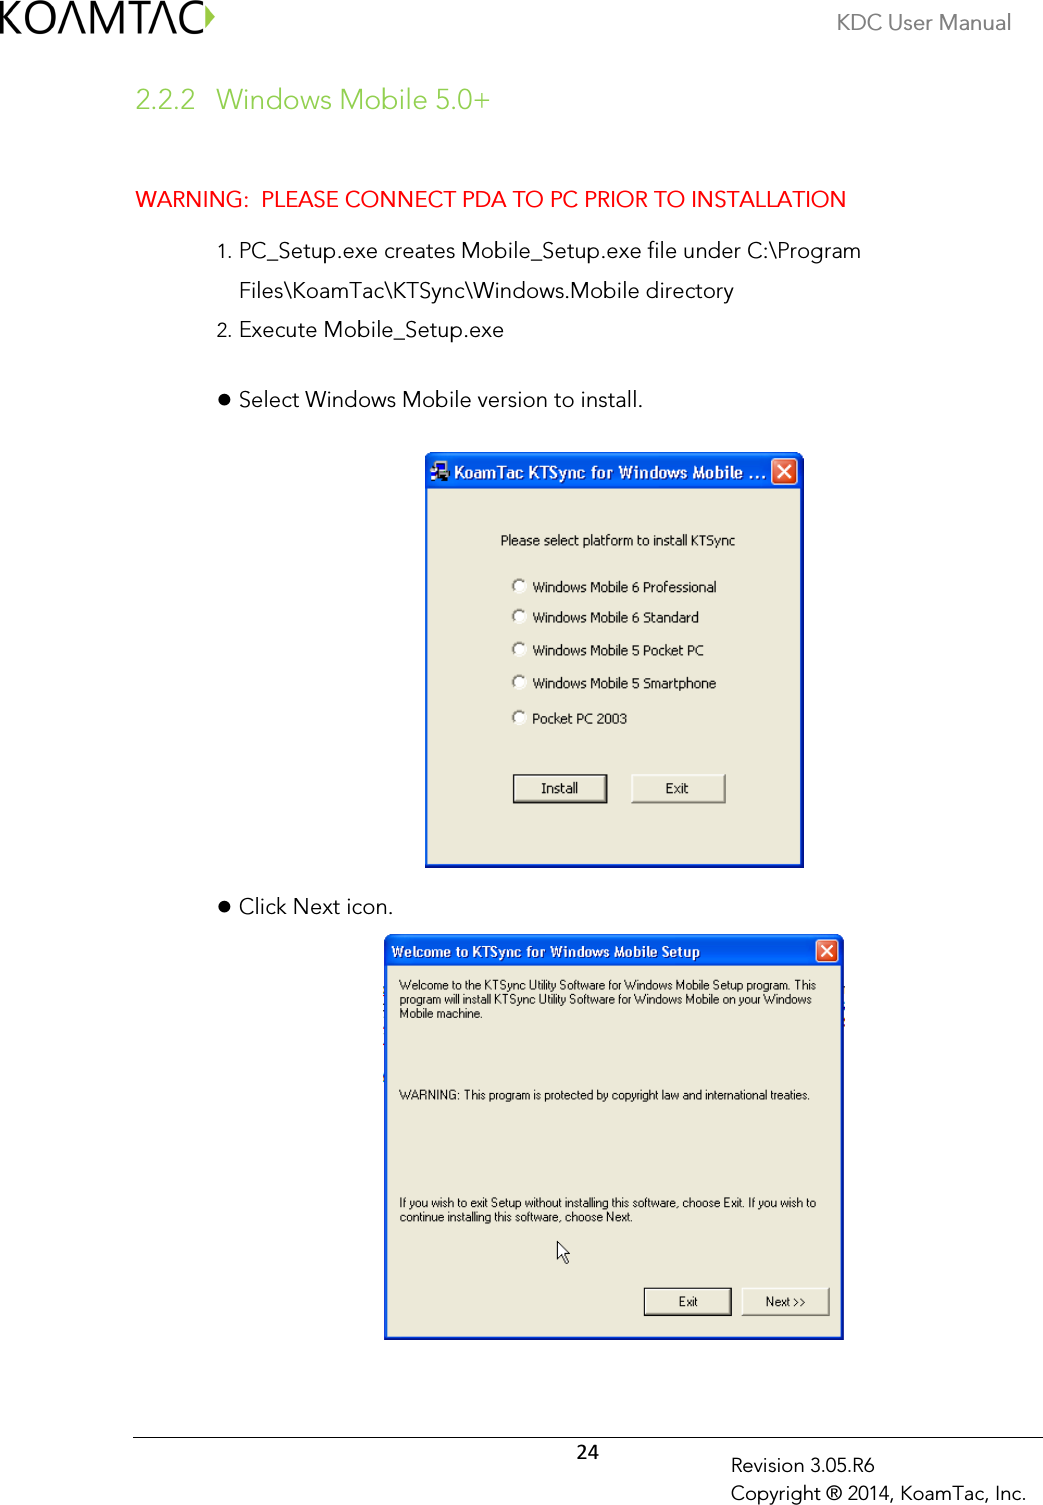 KDC User Manual  24 Revision 3.05.R6 Copyright ® 2014, KoamTac, Inc. 2.2.2  Windows Mobile 5.0+  WARNING:  PLEASE CONNECT PDA TO PC PRIOR TO INSTALLATION 1. PC_Setup.exe creates Mobile_Setup.exe file under C:\Program Files\KoamTac\KTSync\Windows.Mobile directory 2. Execute Mobile_Setup.exe   Select Windows Mobile version to install.     Click Next icon.    